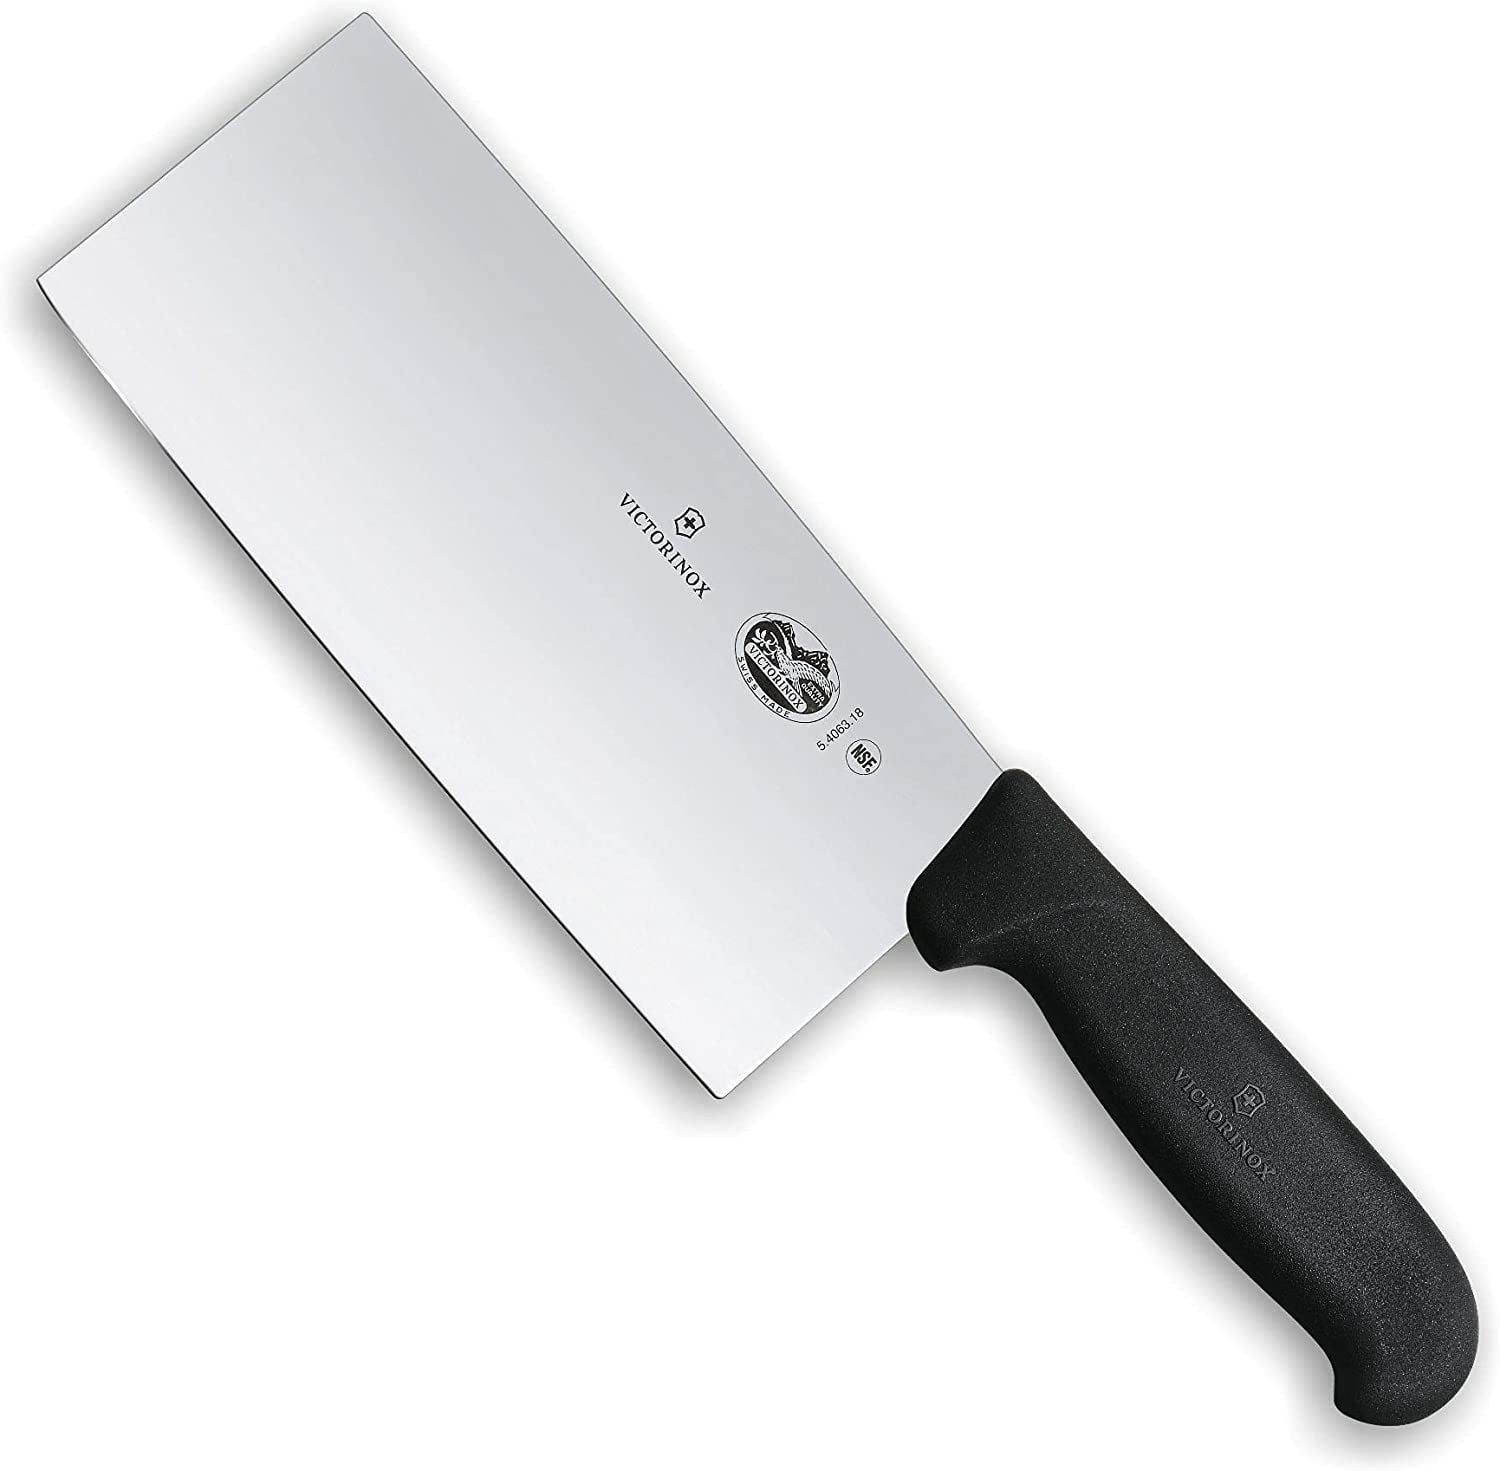  Victorinox 7 Chinese Classic Chefs Knife Stainless Steel  Cleaver Butcher Knife Fibrox Handle Swiss Made: Chefs Knives: Home & Kitchen